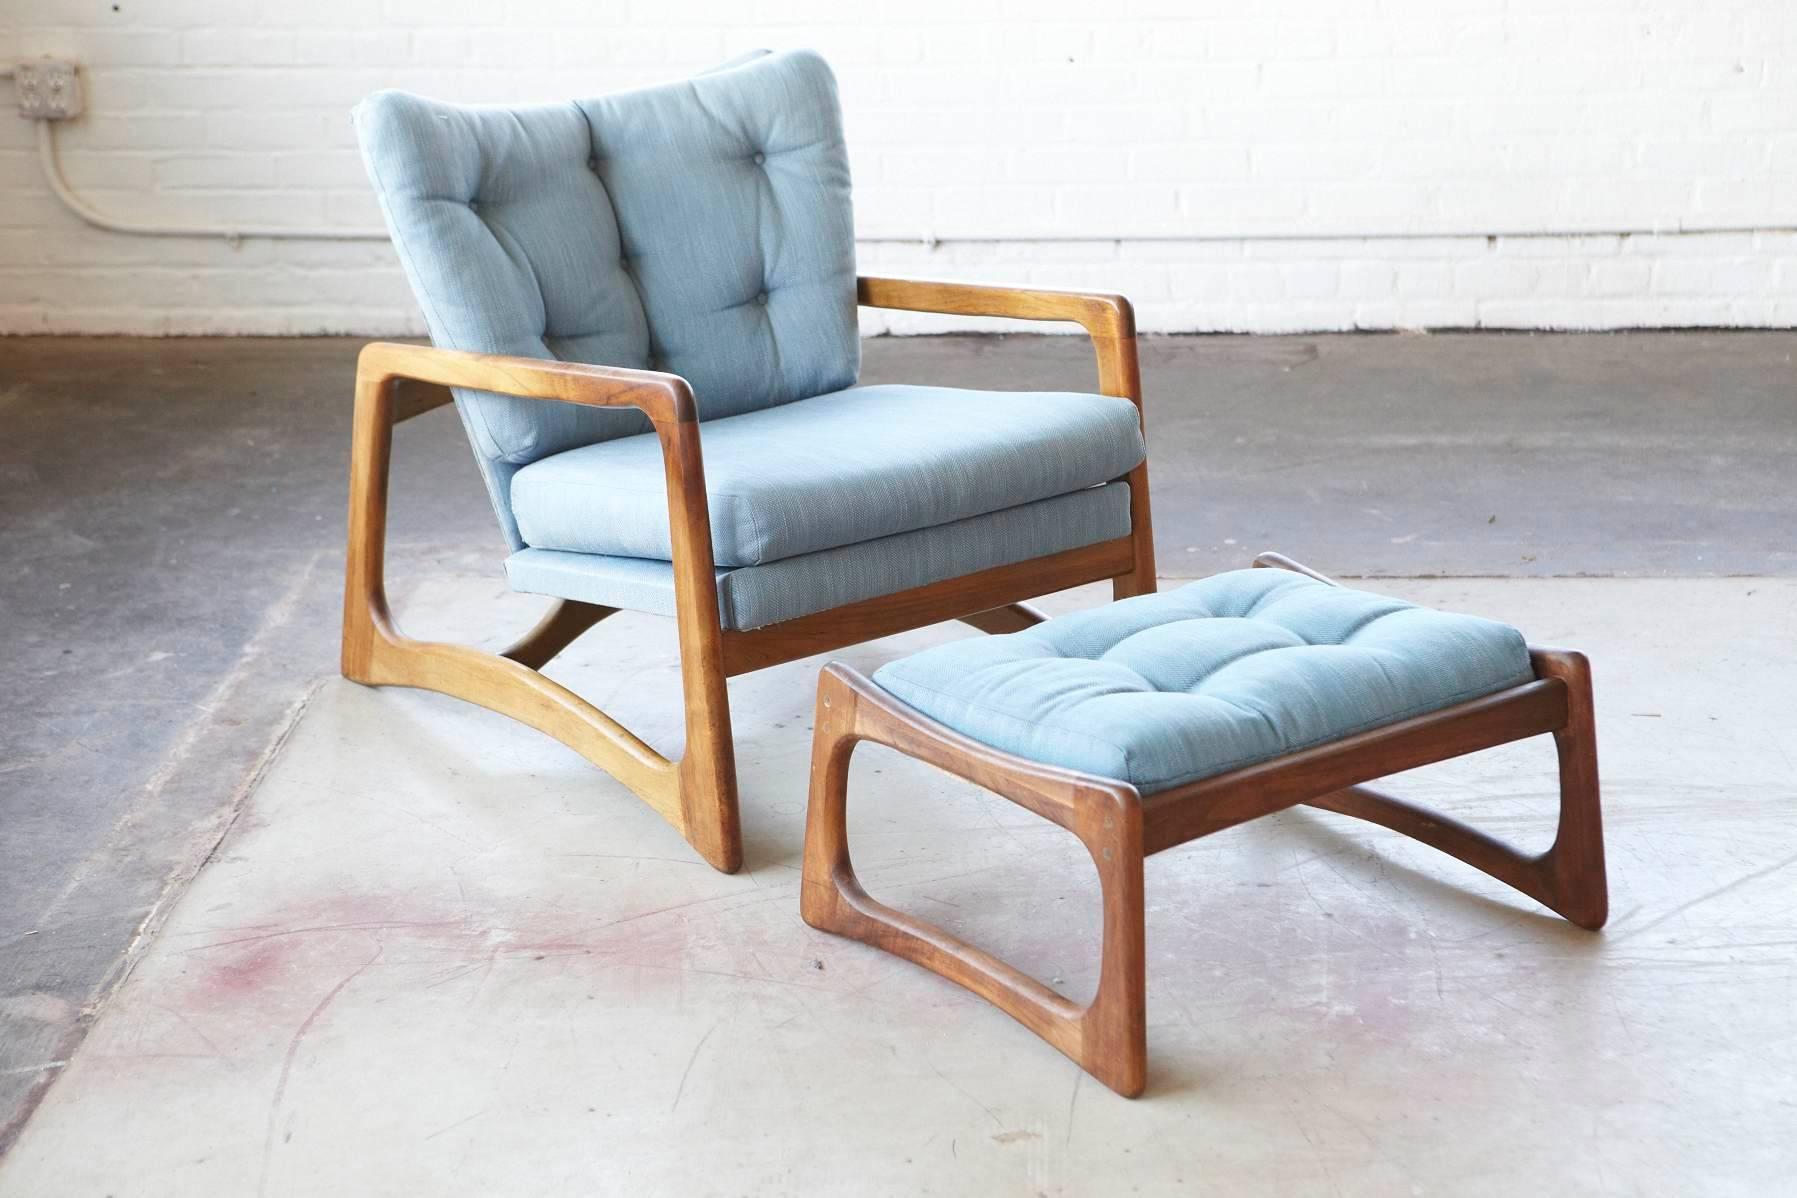 Matching lounge chair and ottoman by Adrian Pearsall for Craft Associates.
The beautiful sculptural walnut frame of the chair and the ottoman. 
Please refer to the condition further down in the description.